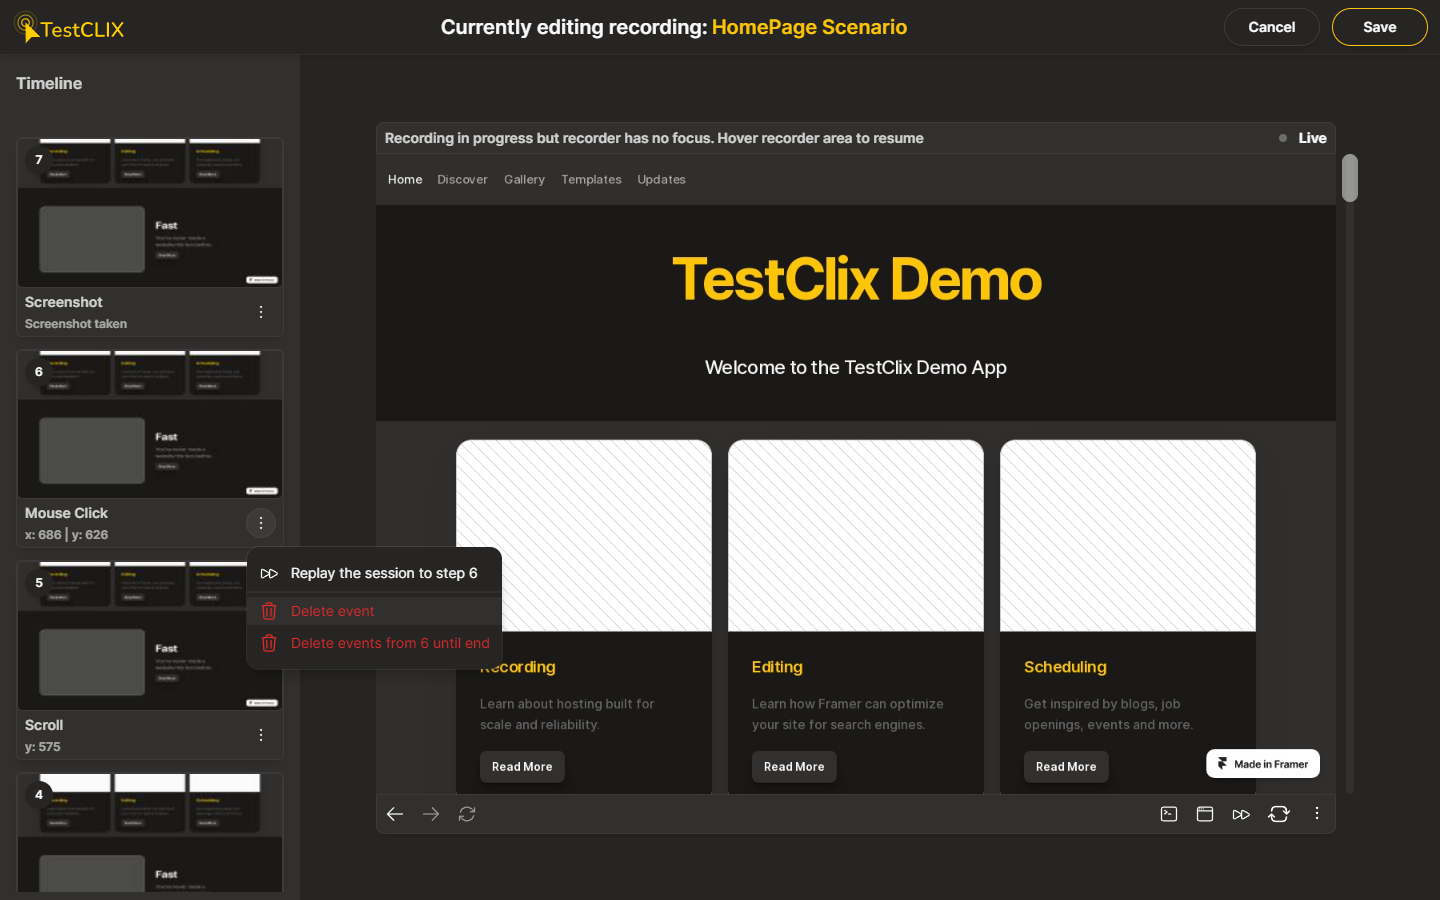 Editing tests with TestCLIX is as intuitive as editing a video. The
        platform gives you the flexibility to rearrange or remove user steps
        easily. It ensures your scenario tests remain effective and relevant,
        even as you continue to expand and change your website's UI.